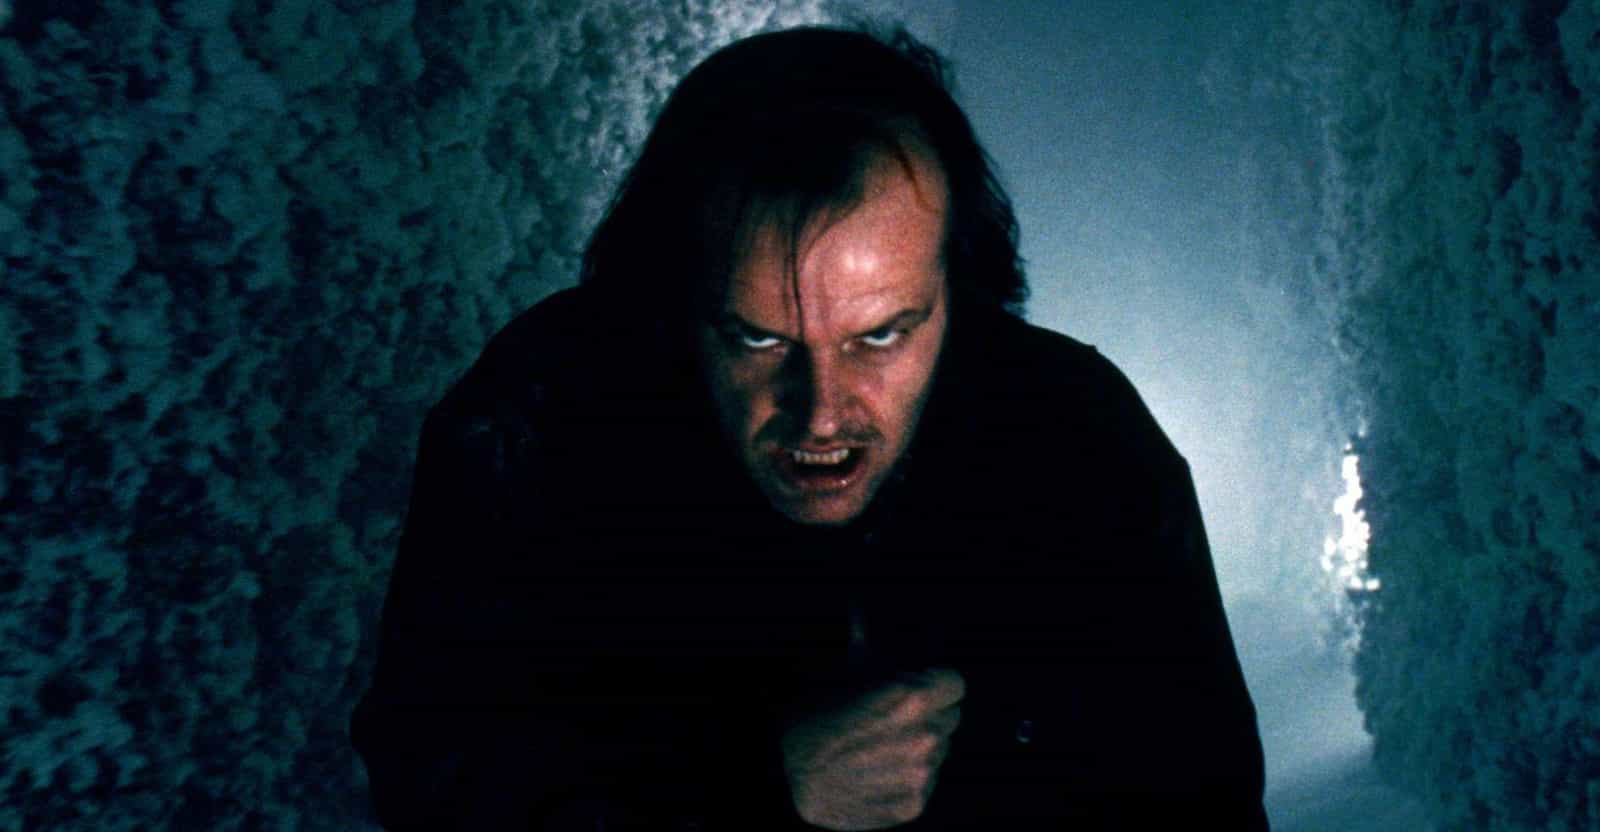 The Making Of 'The Shining' Was A Bigger Nightmare Than The Film's Story